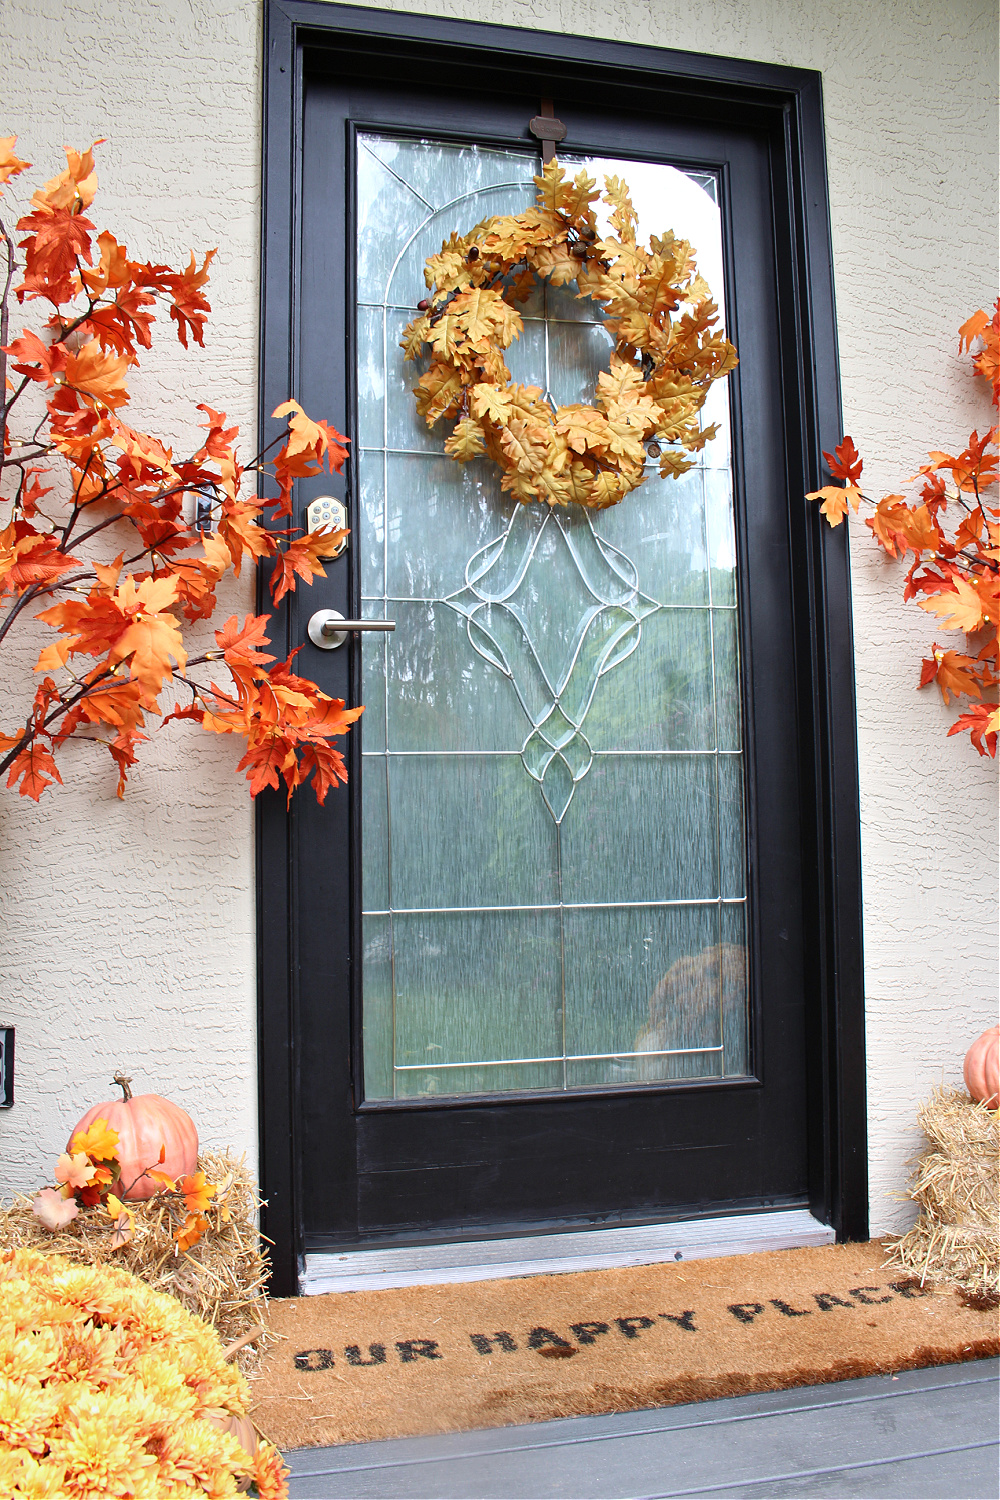 Fall front porch decorated with mums, pumpkins and lighted trees.